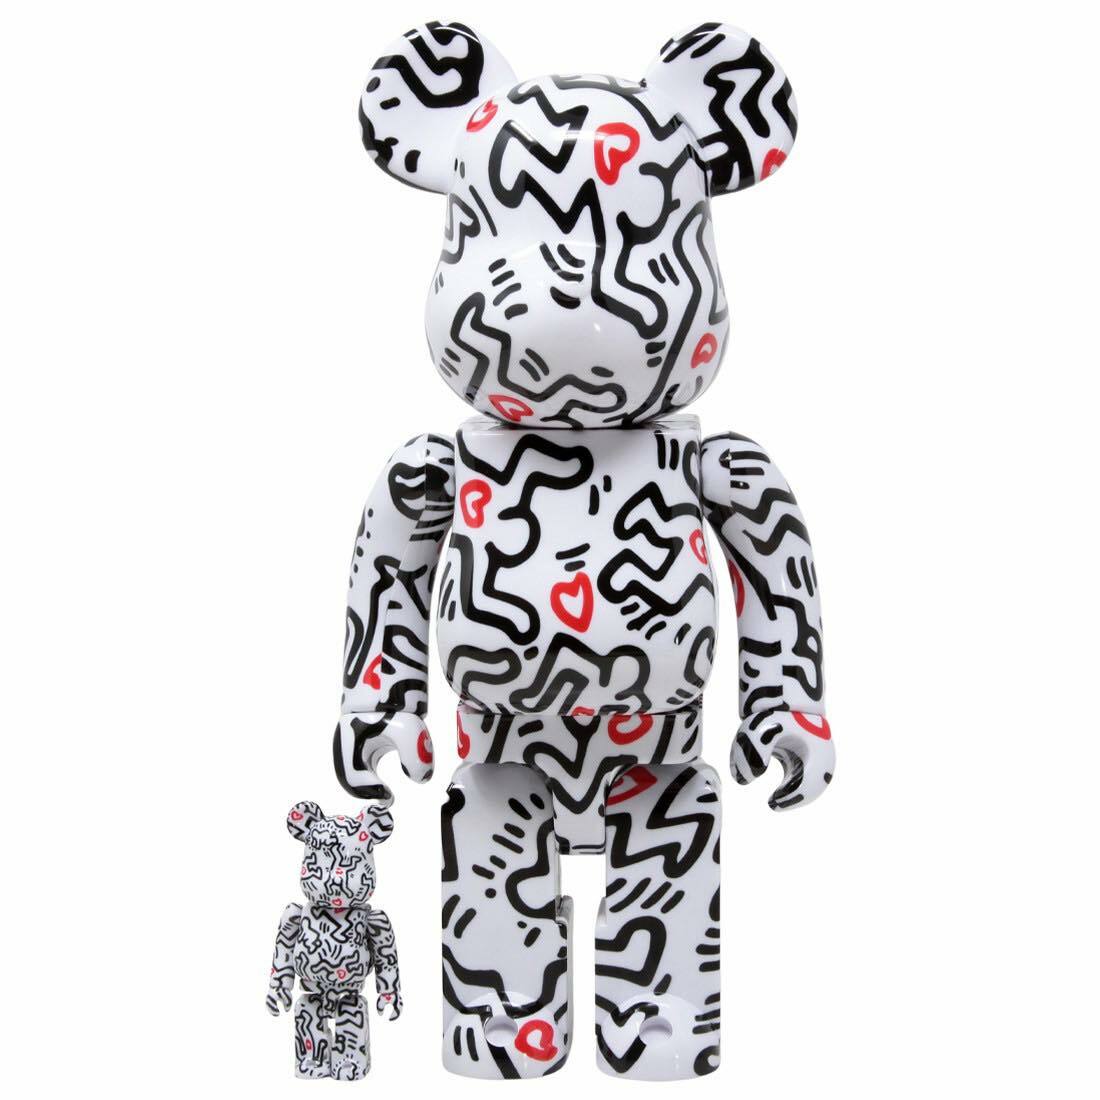 Bearbrick Keith Haring #8 400% + 100% – The Hype Room Official Store